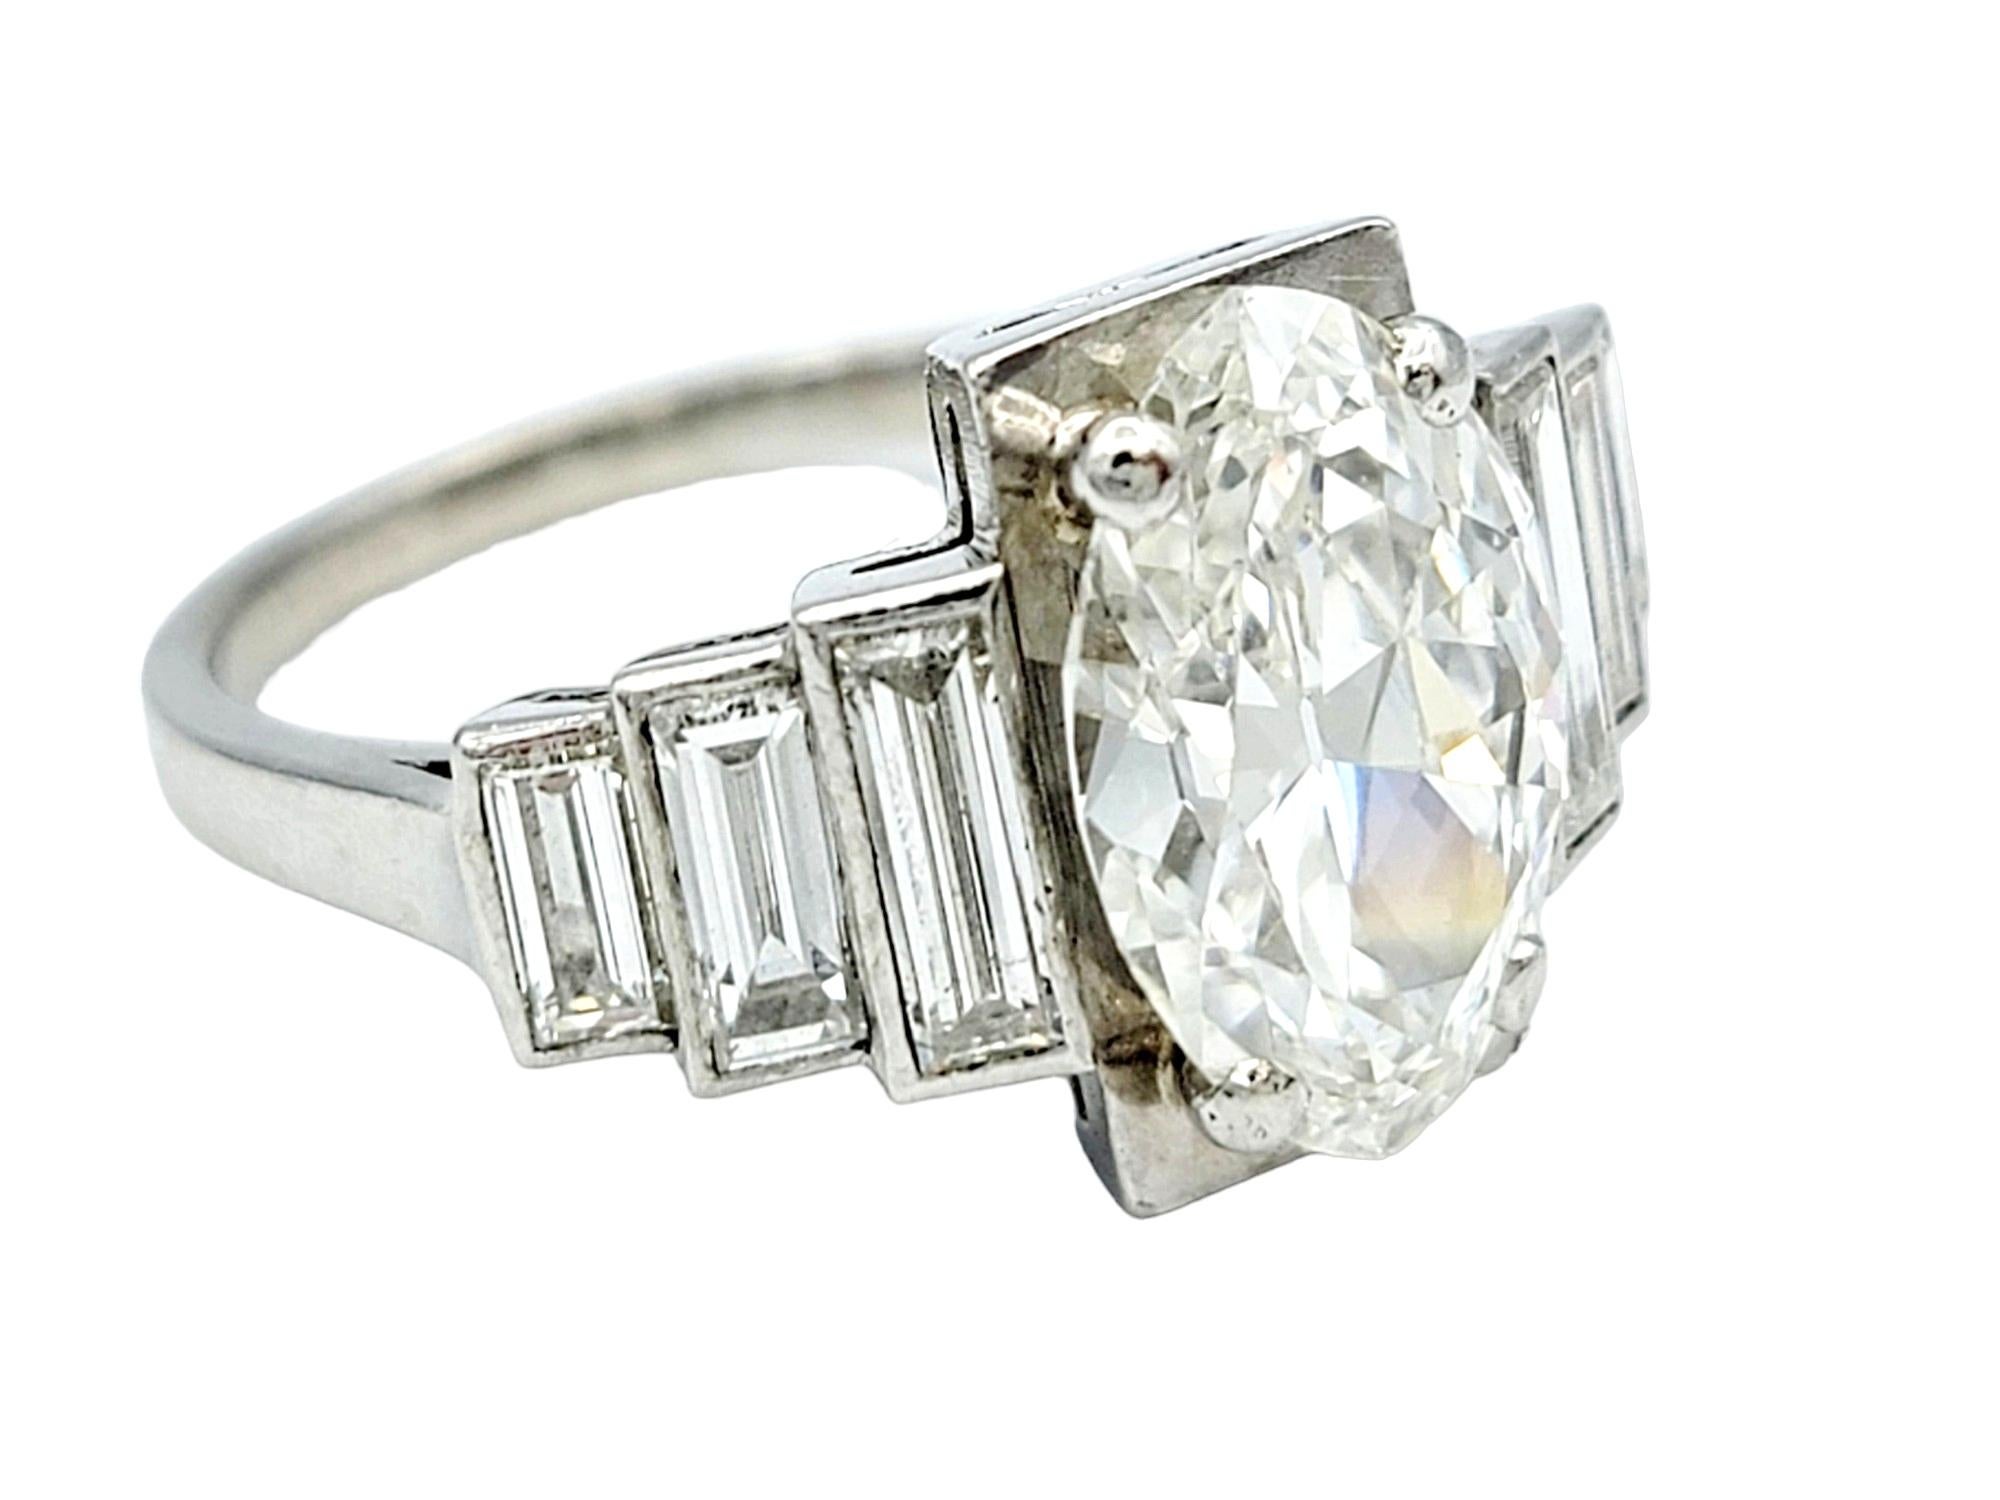 Ring Size: 6.5

This incredible Art Deco platinum and diamond ring is a radiant embodiment of timeless glamour and sophistication. At its center, a dazzling 2.5 carat marquise-cut diamond takes the spotlight, showcasing its brilliant sparkle and